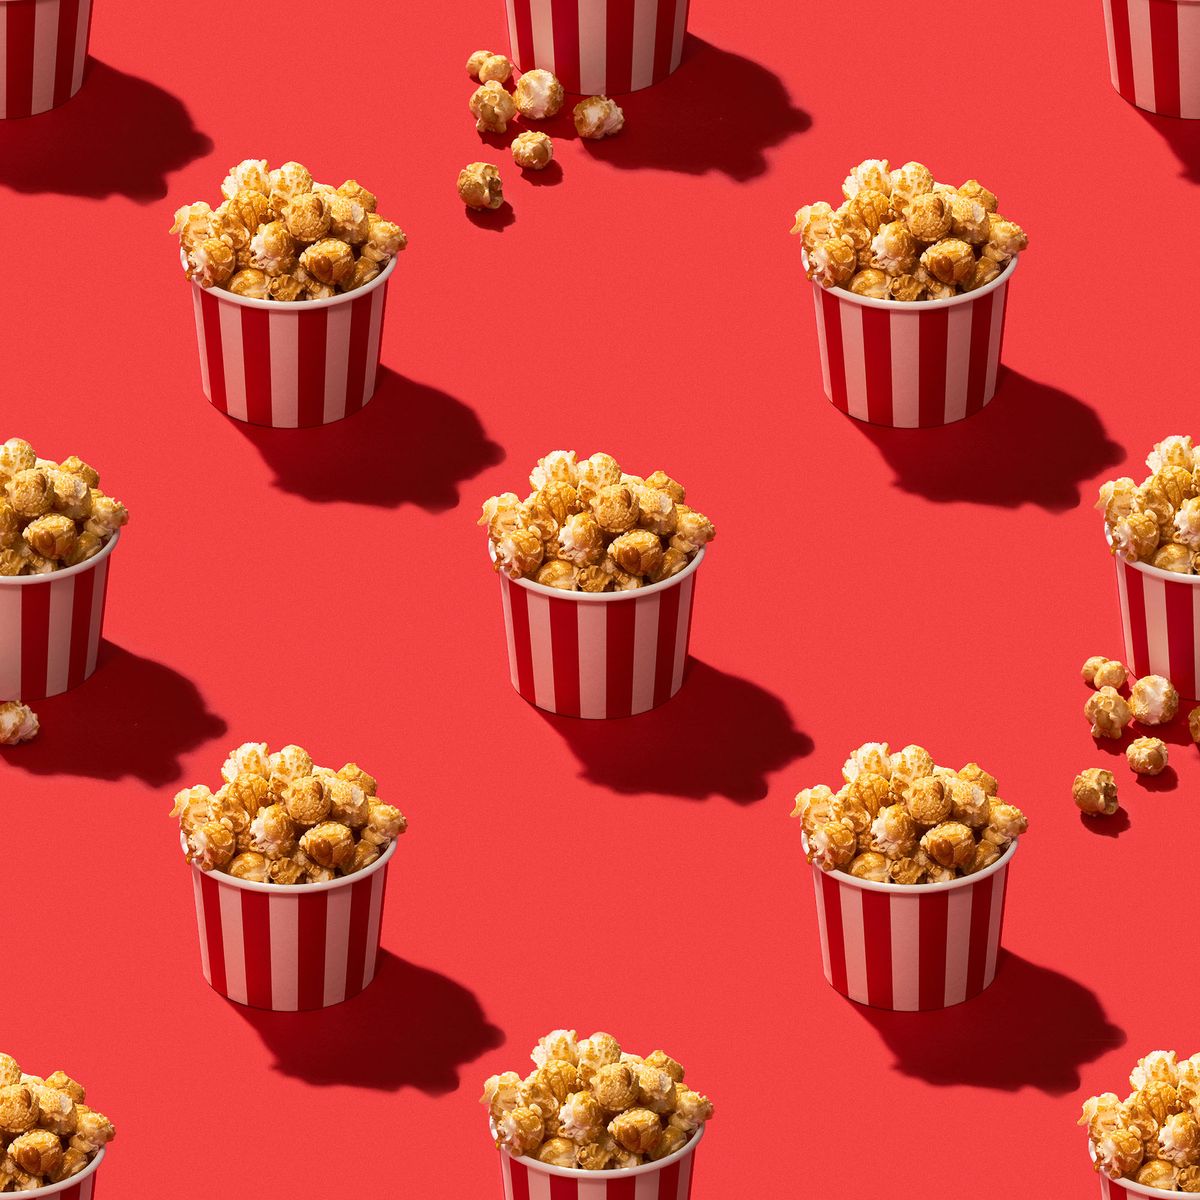 Popcorn in striped paper box on red background seamless pattern stock photo